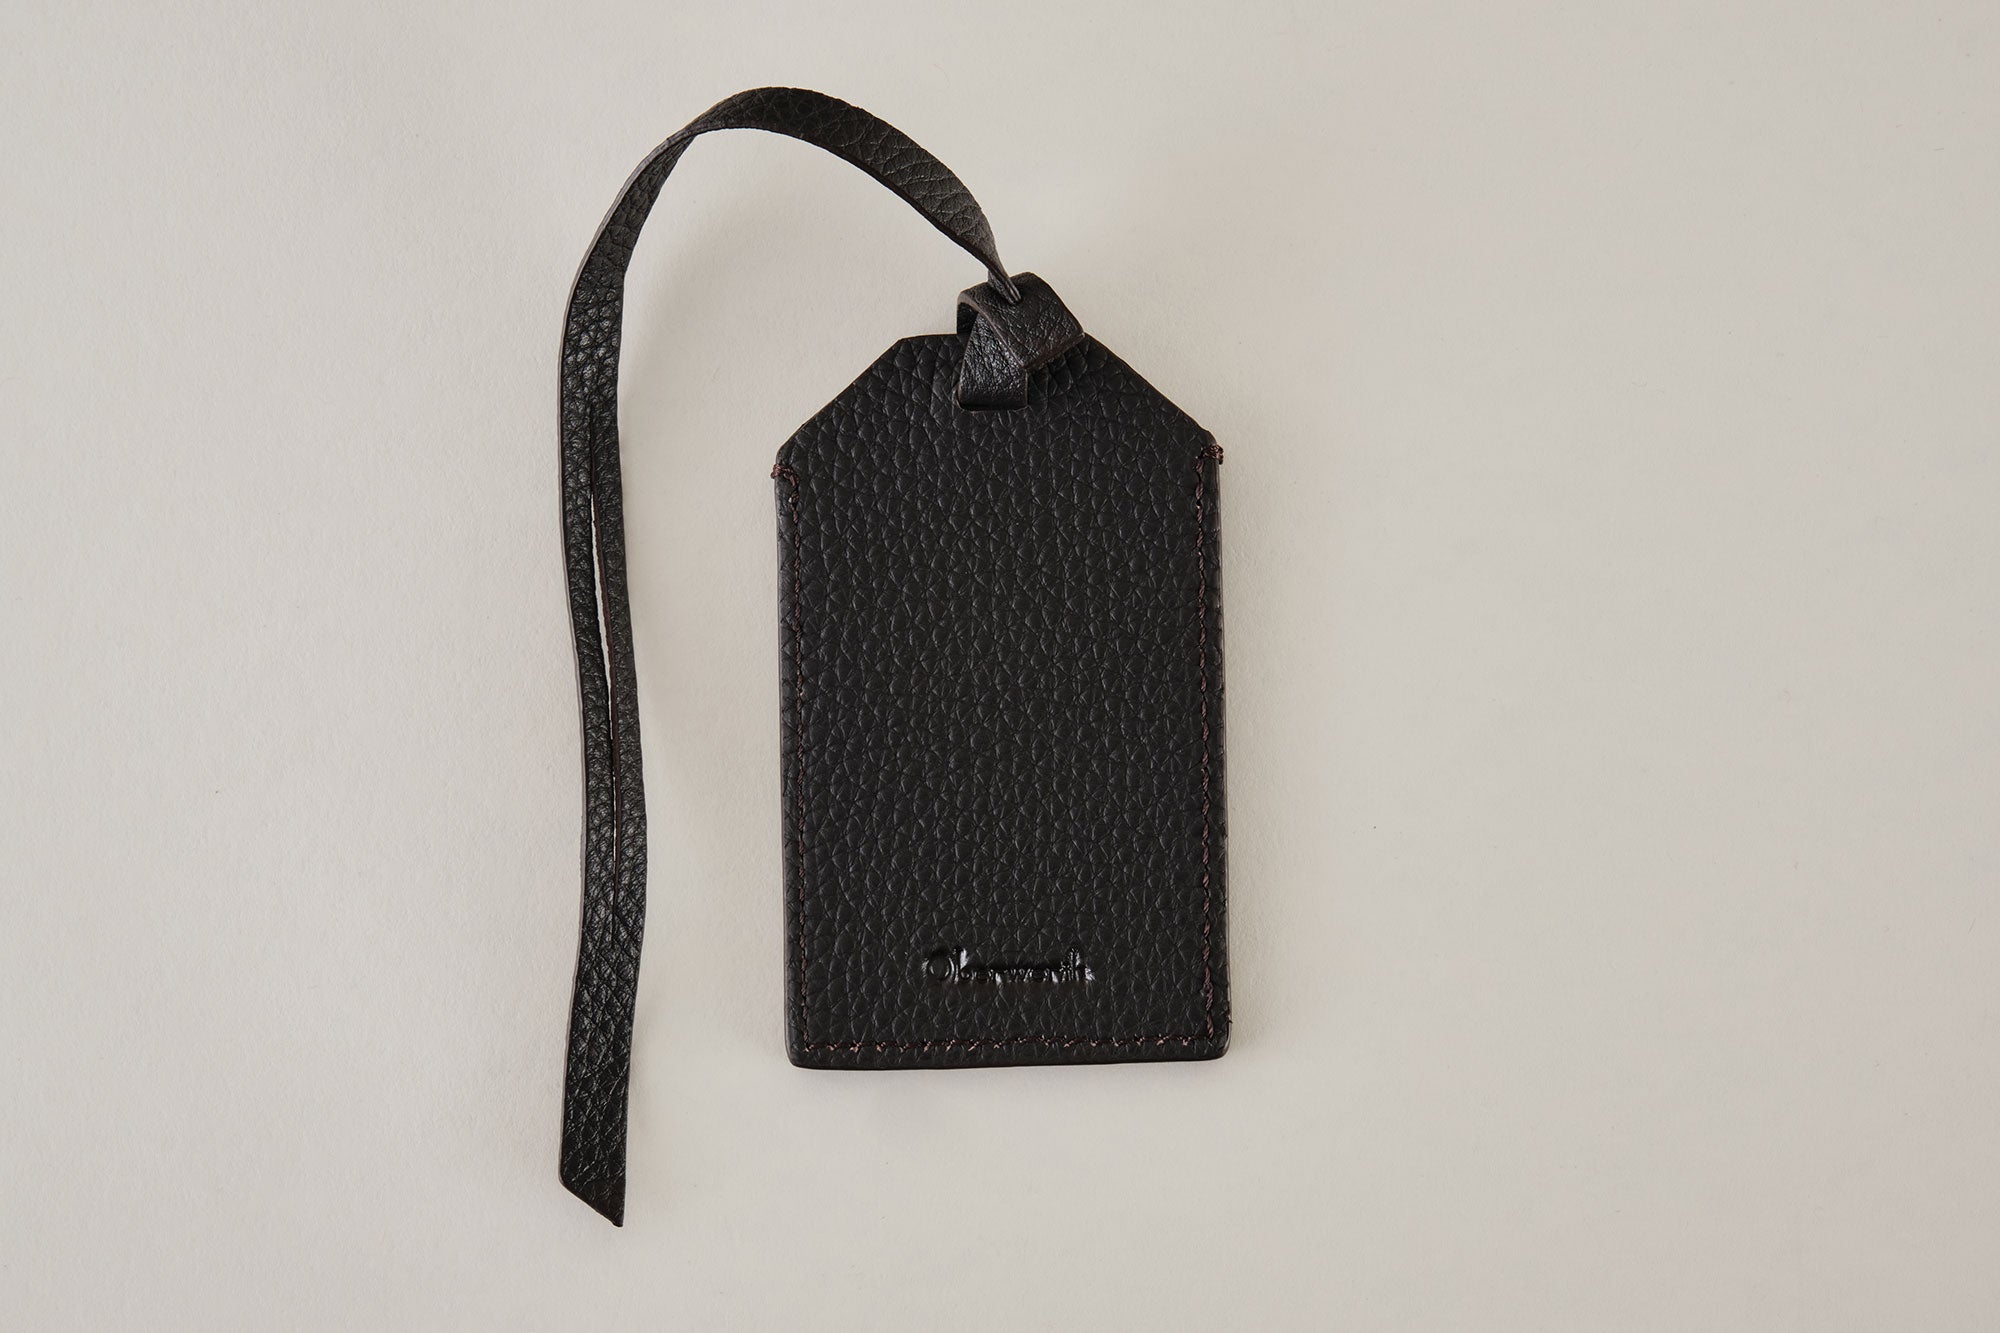 Leather Luggage Tag Casual